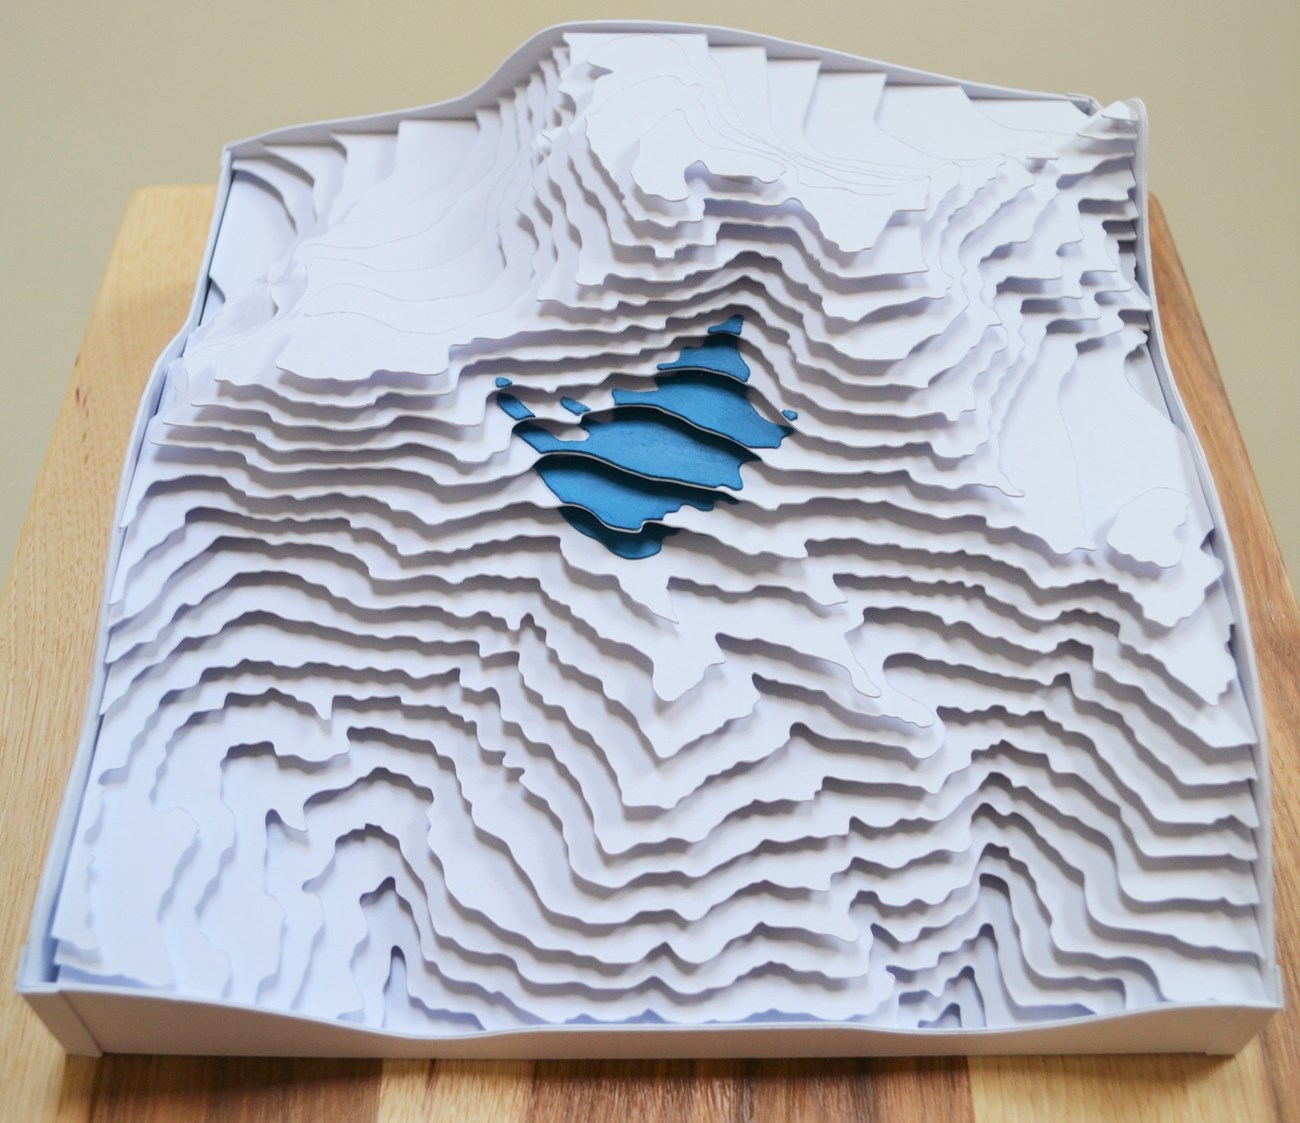 Layers of paper, cut and arranged in stacked horizontal planes to create the contours of a white mountain peak and a small blue glacier tucked just below the summit.